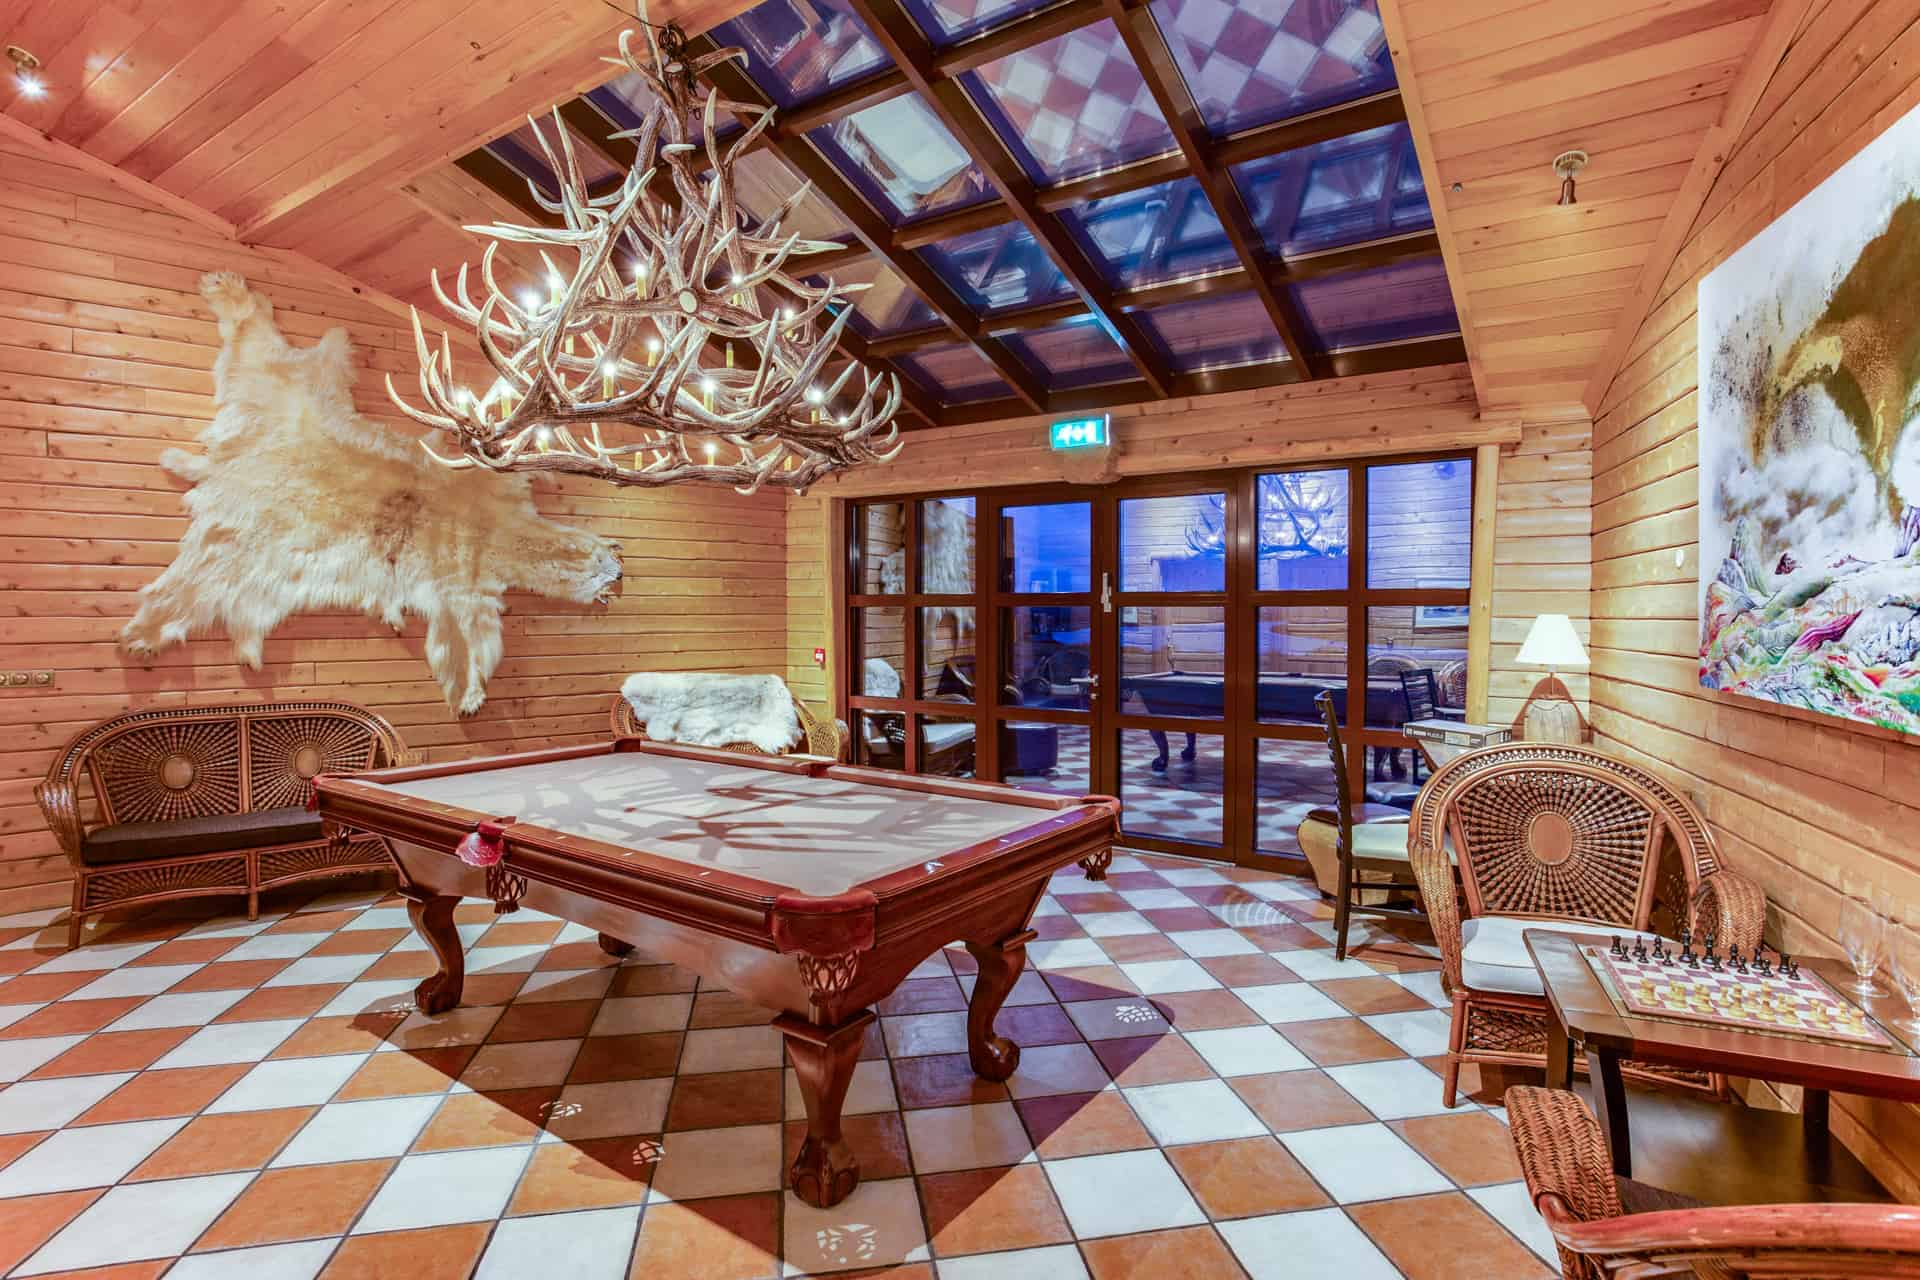 Hotel Rangá's game room includes a pool table, a polar bear skin on the wall, an antler chandelier, a chess board and more local art.